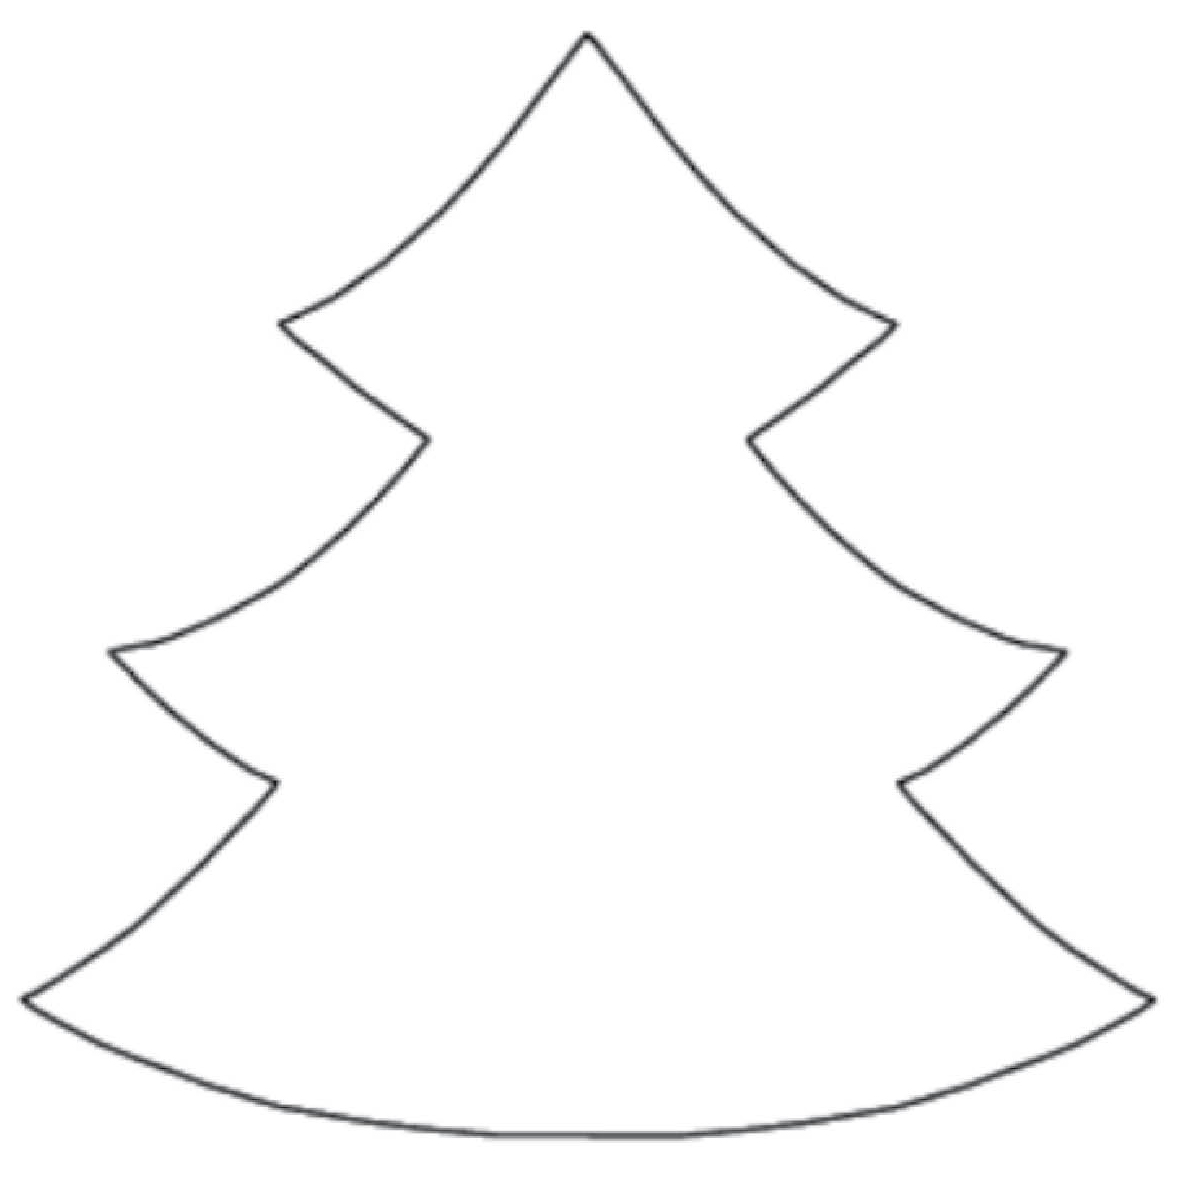 Pine Tree Outline Clipart | Clipart Panda - Free Clipart Images